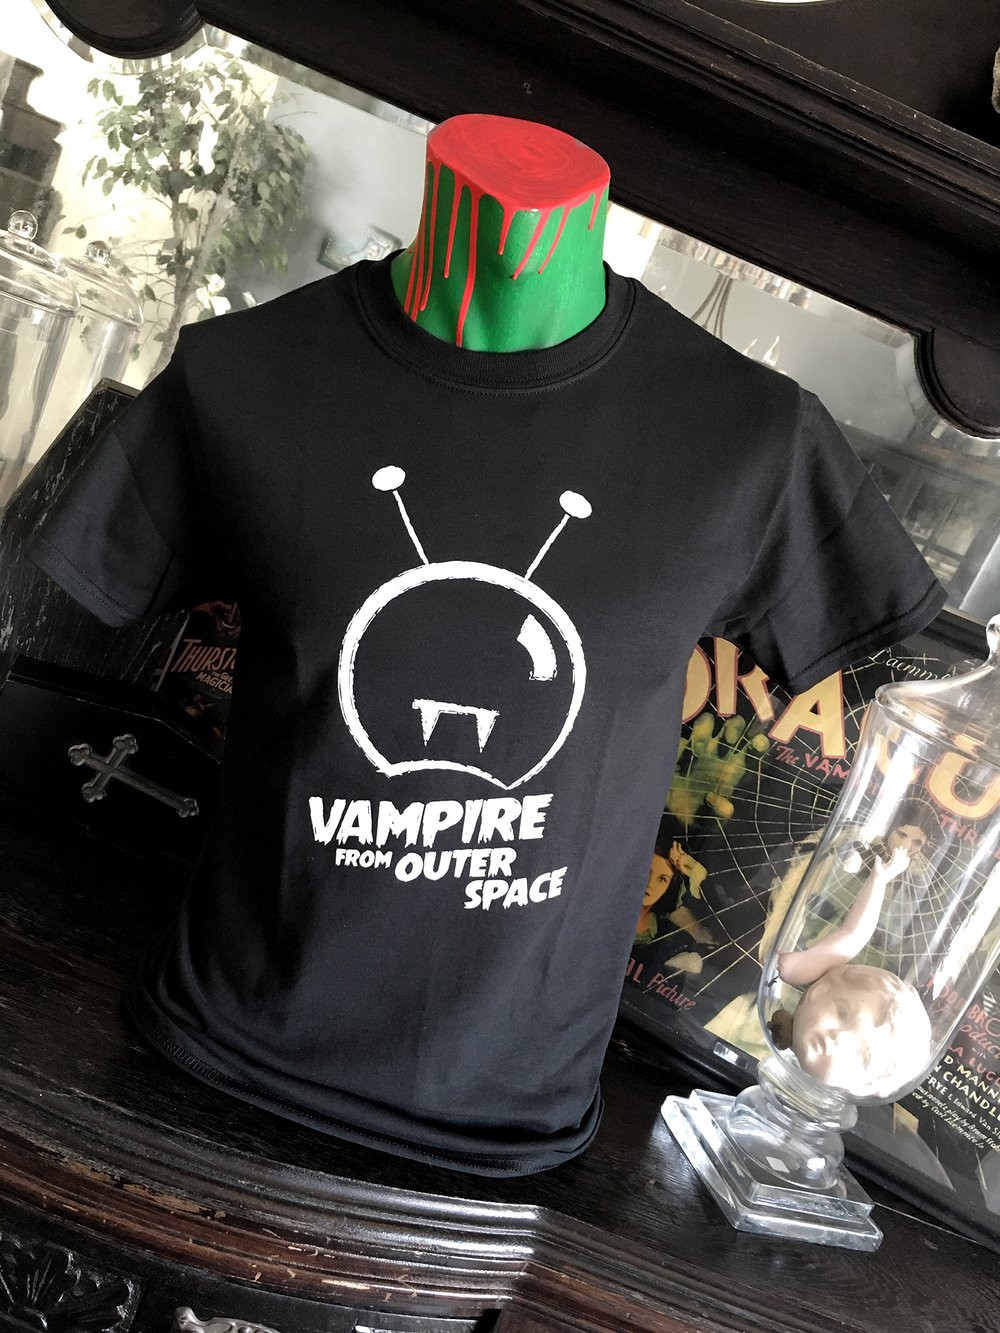 "Vampire From Outer Space" T-Shirt